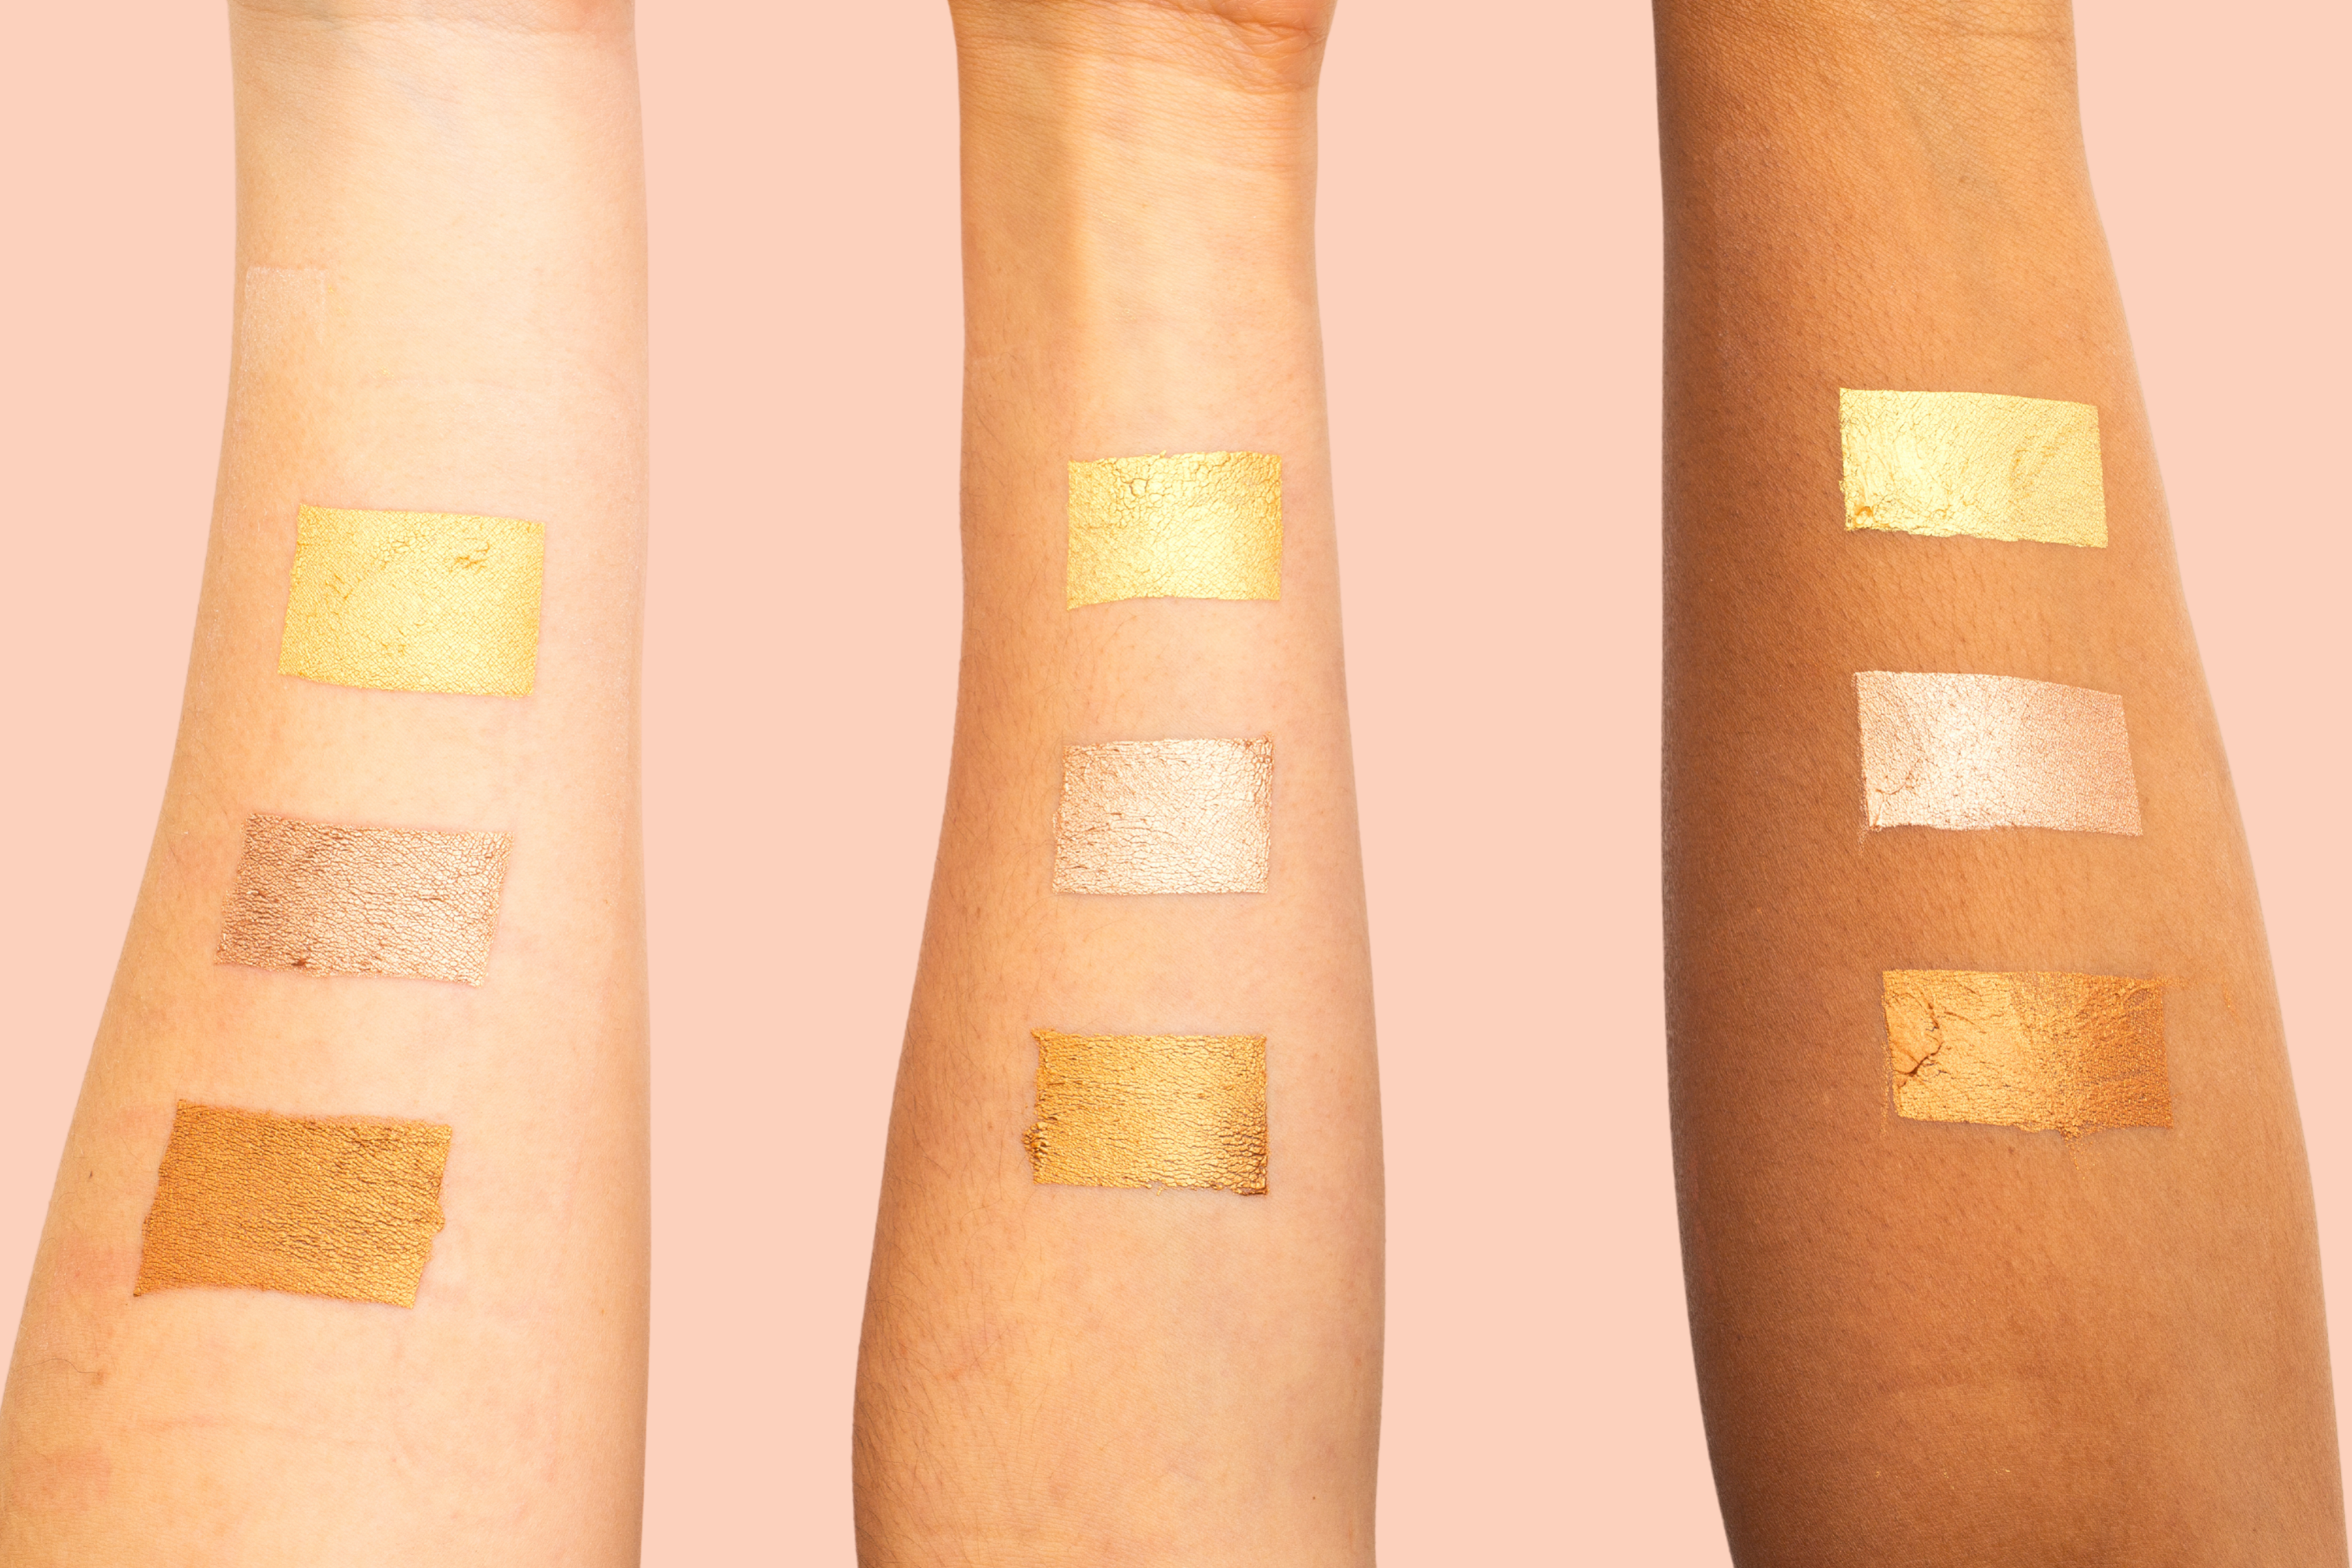 image of skin dew swatches on light, medium and deep complexions on peach backfround